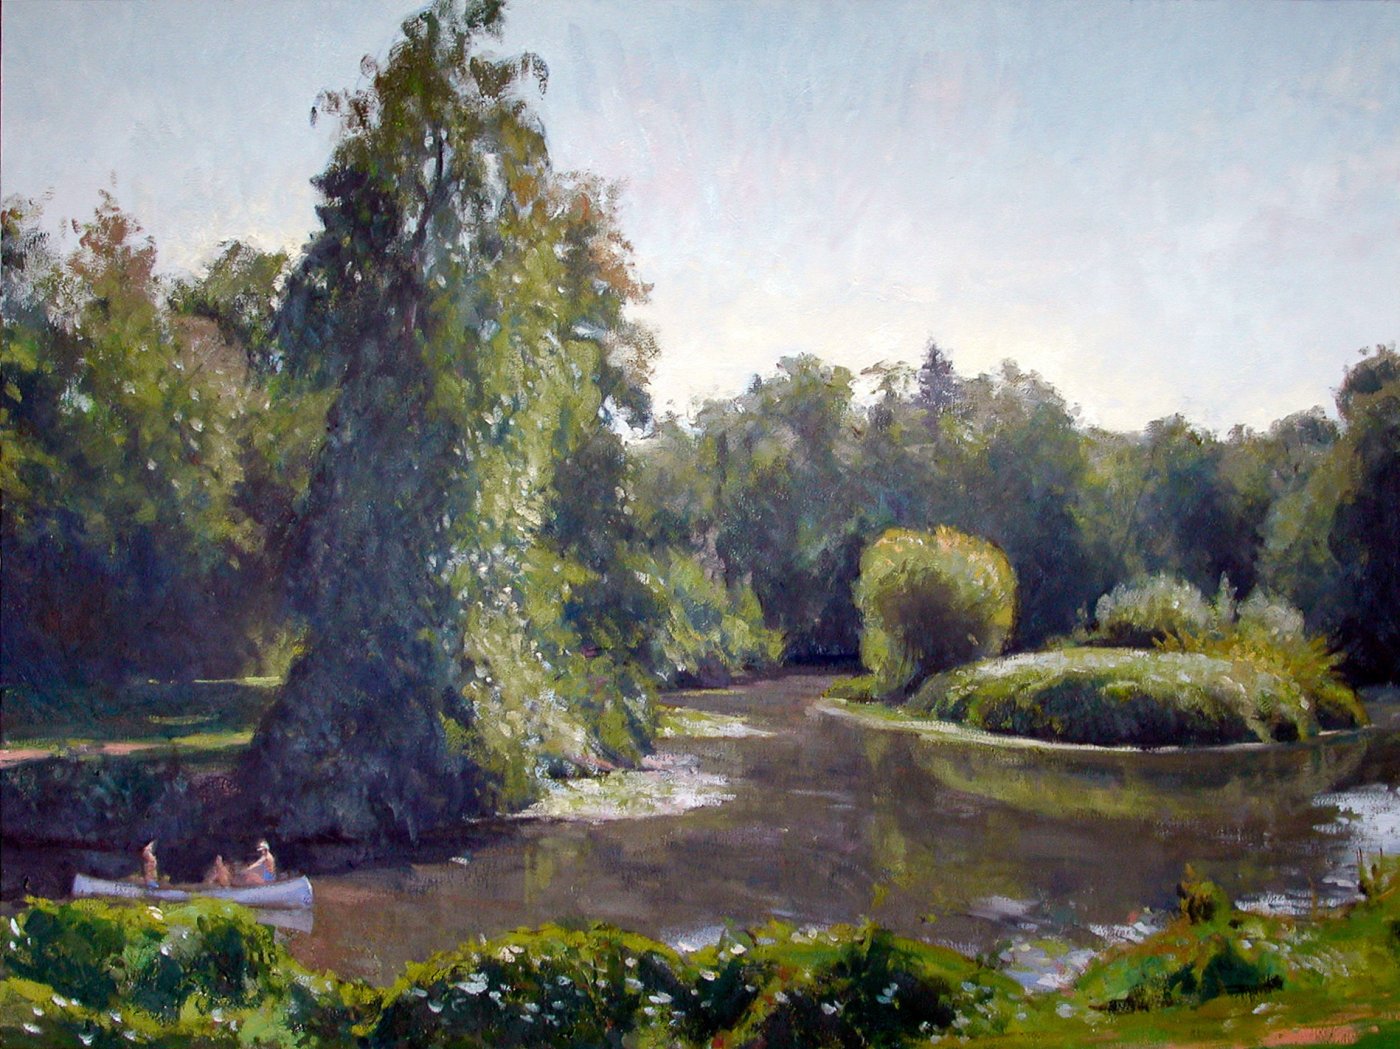 Canoe, oil on canvas, 30 X 40 inches, copyright ©2002, $5,500